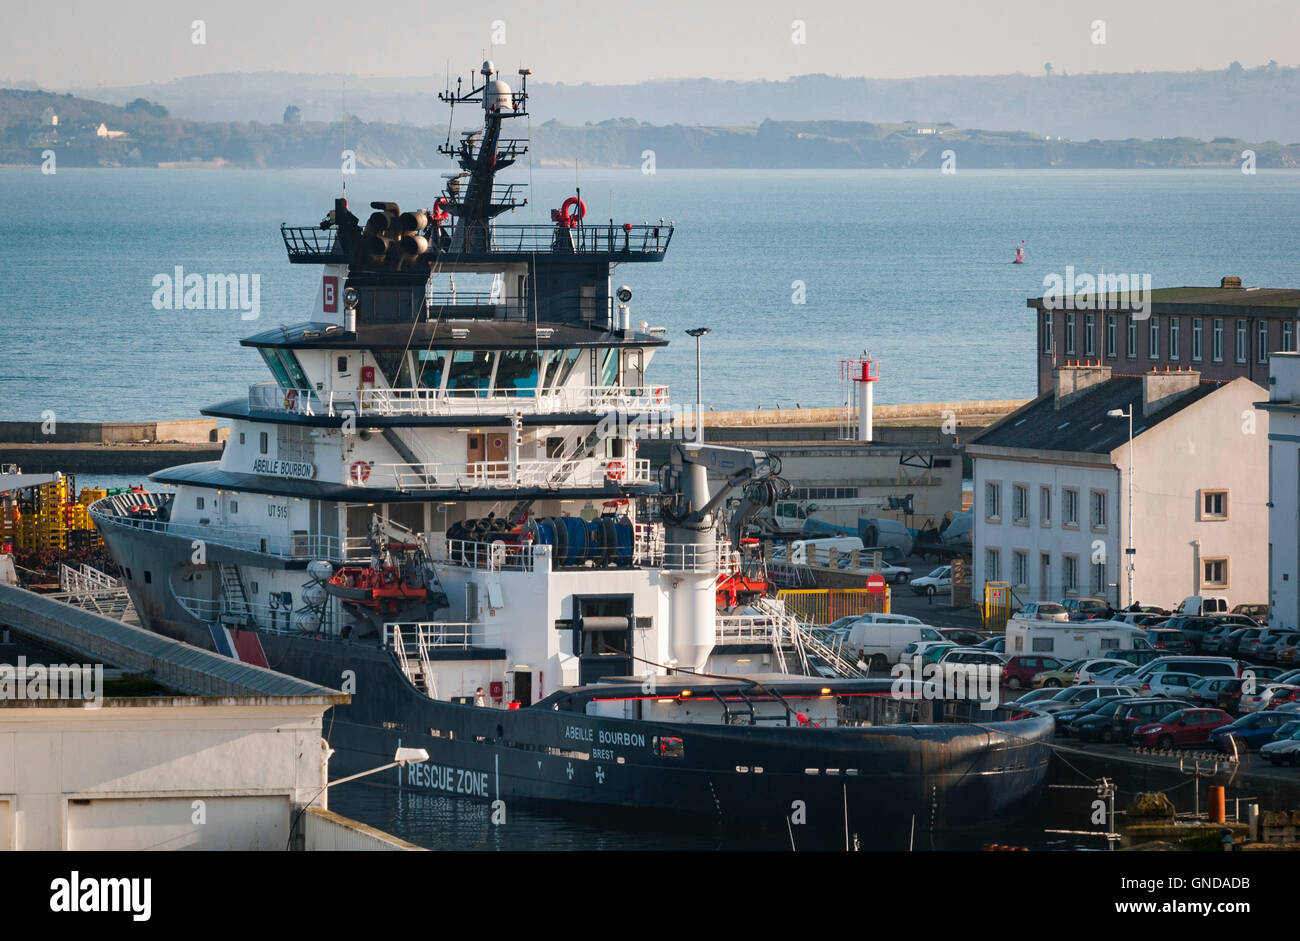 Abeille Bourbon high sea tugboat moored in the port of Brest, France Stock Photo